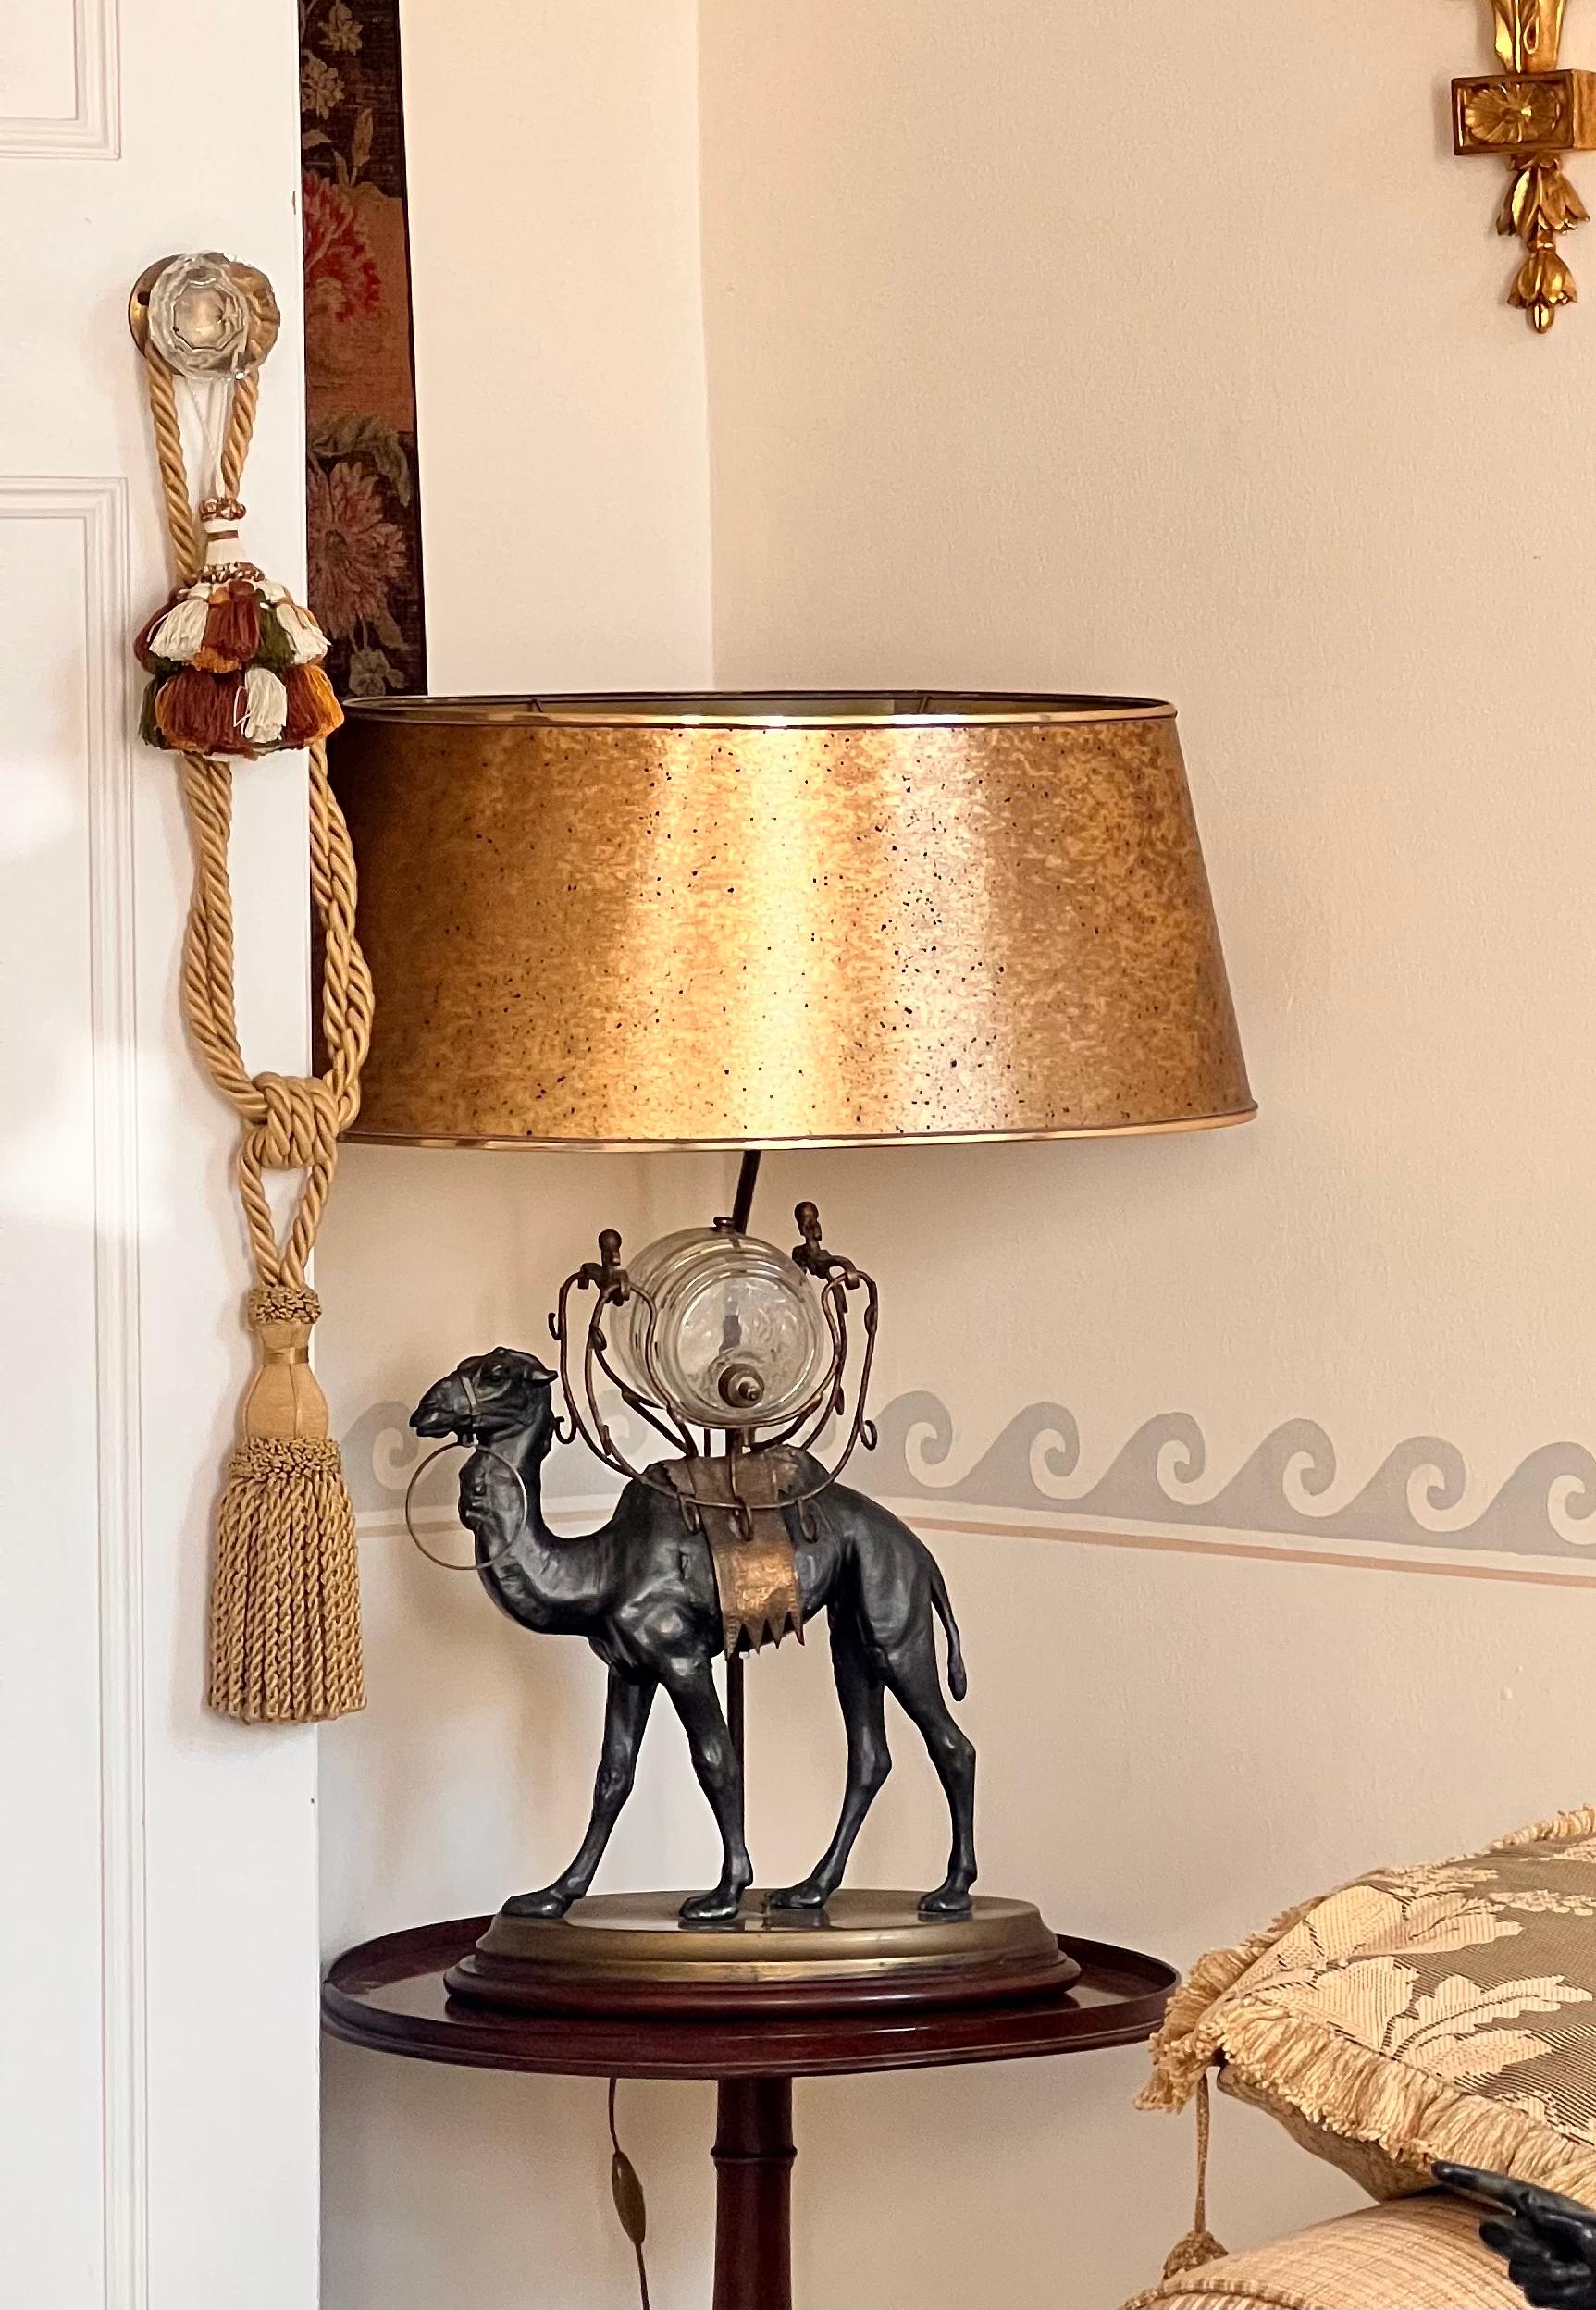 A very decorative Napoleon III period patinated spelter figure of a camel carrying a glass barrel, now mounted as table lamp.
France, circa 1860's–70's.

Why we like it
Wonderfully sculptural and exotic, redolent of the oriental exuberance, this